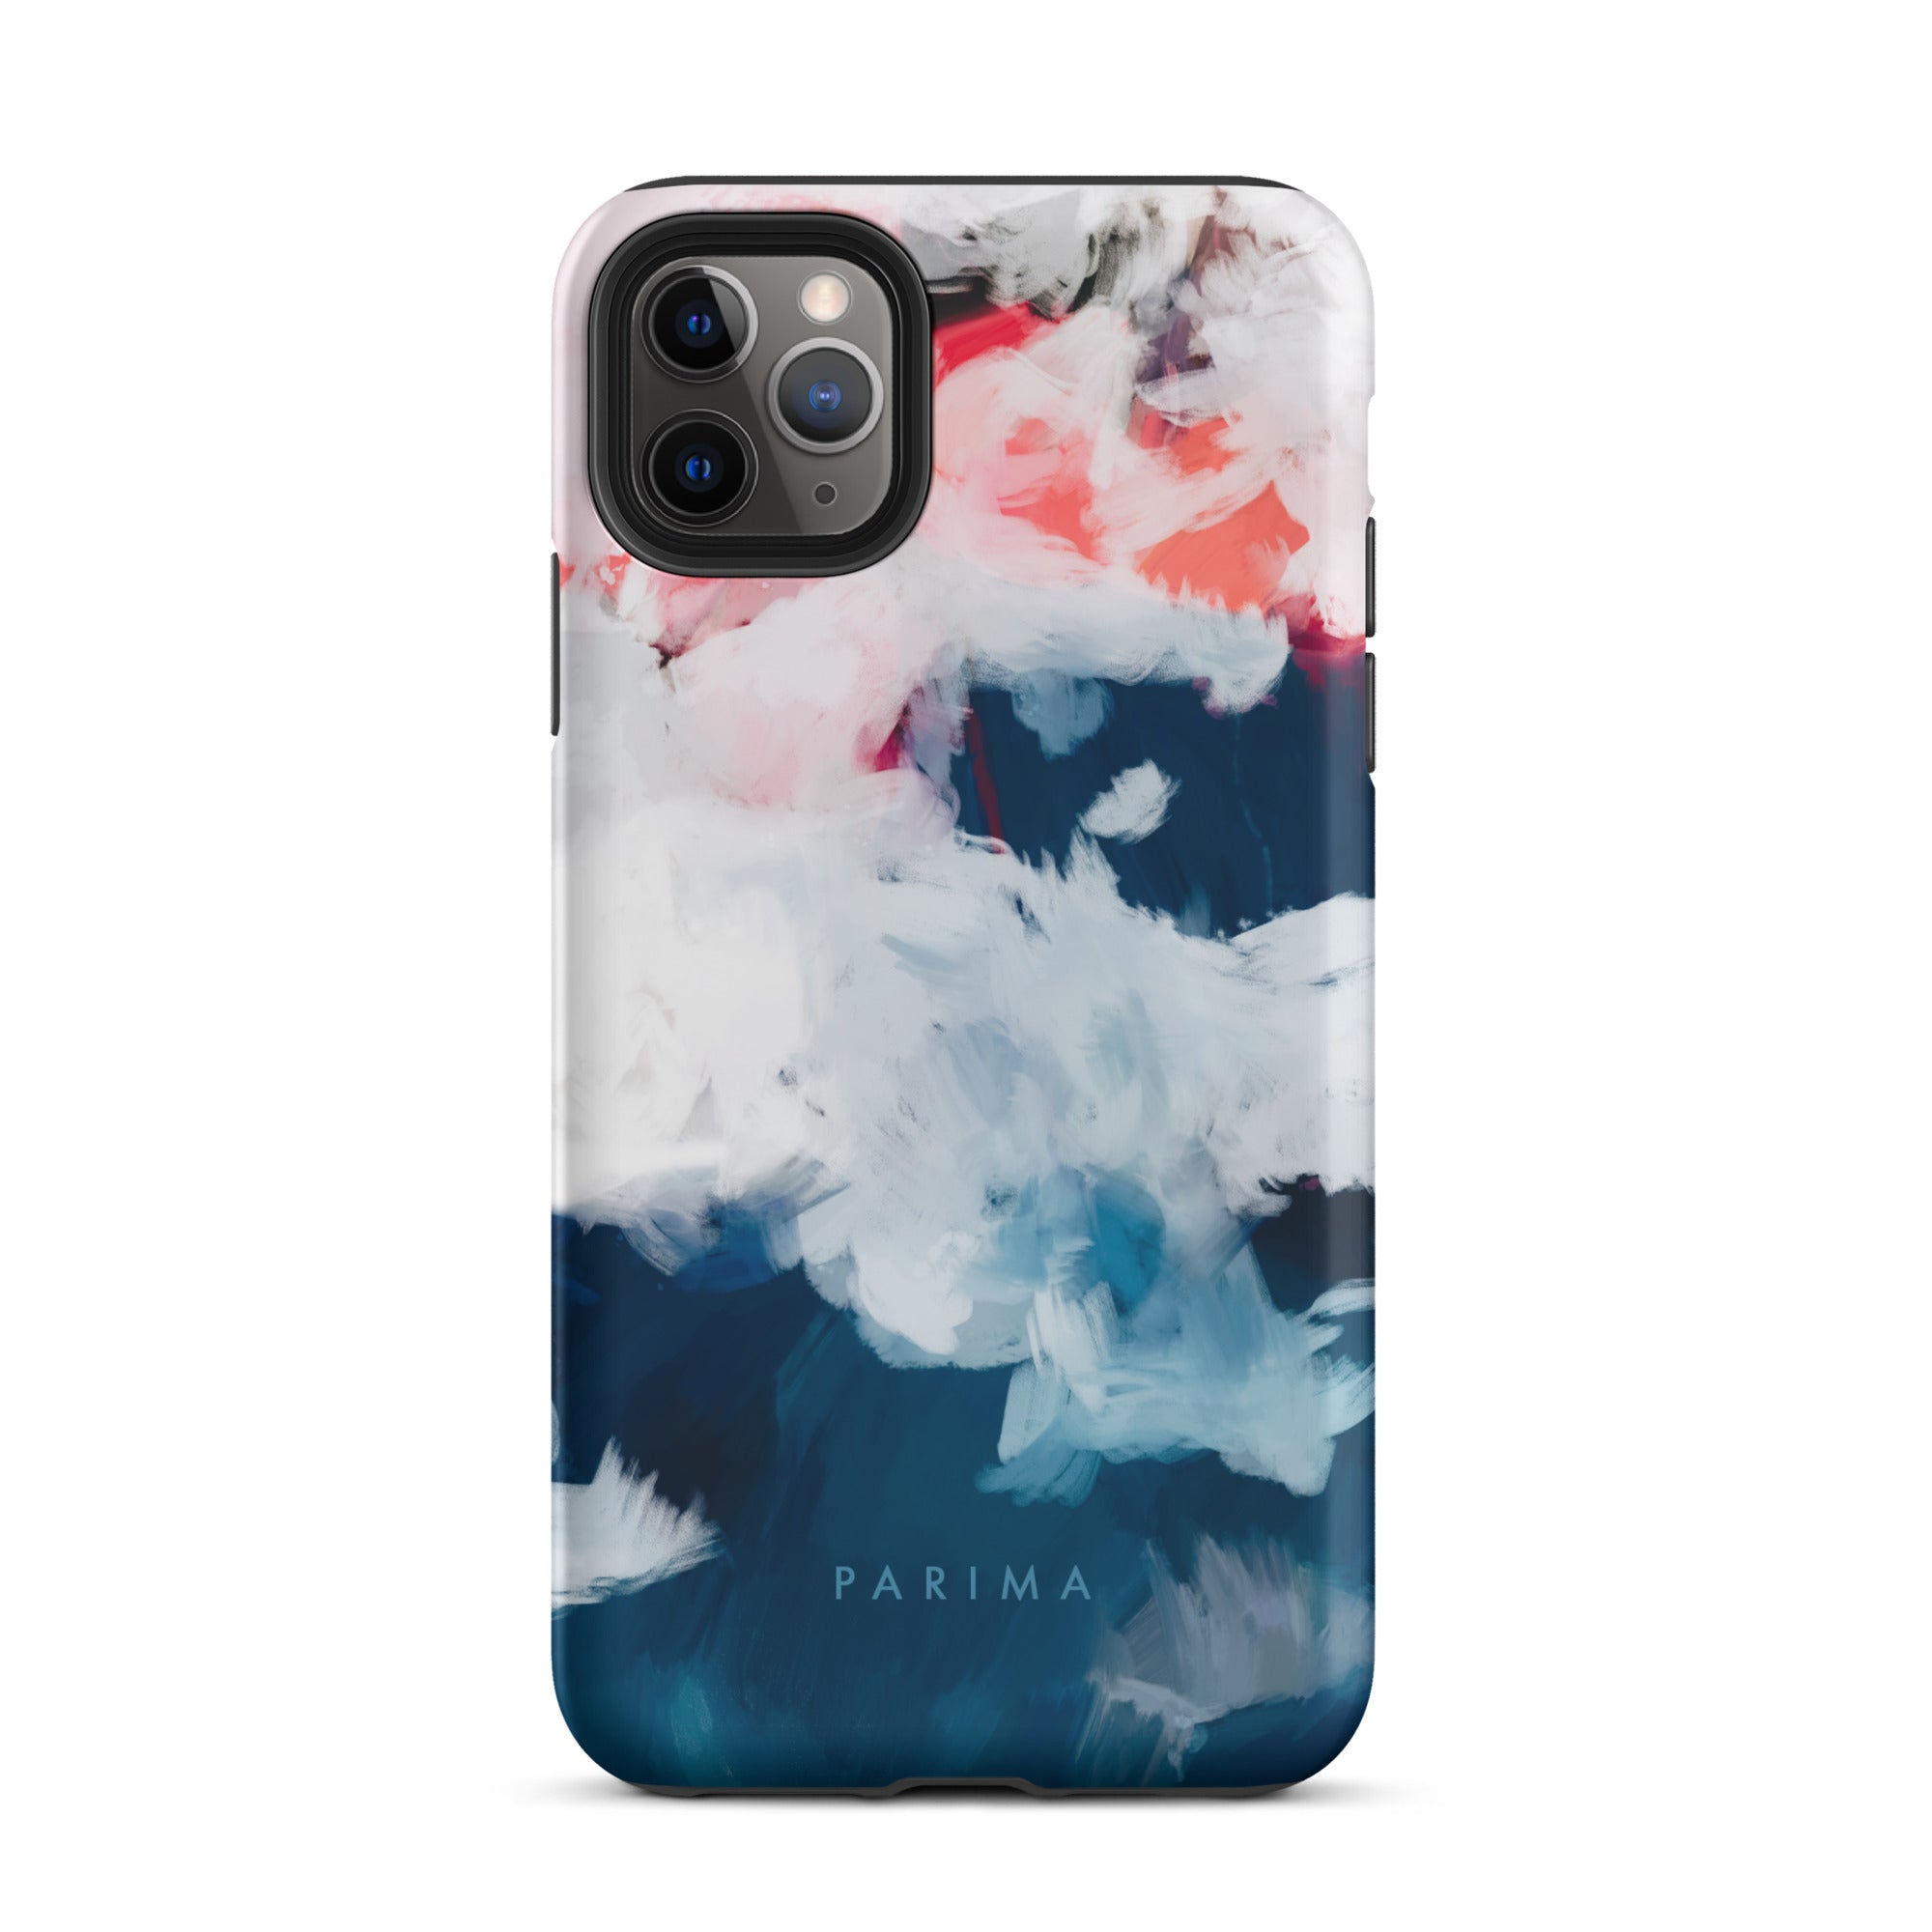 Oceane, blue and pink abstract art on iPhone 11 Pro Max tough case by Parima Studio